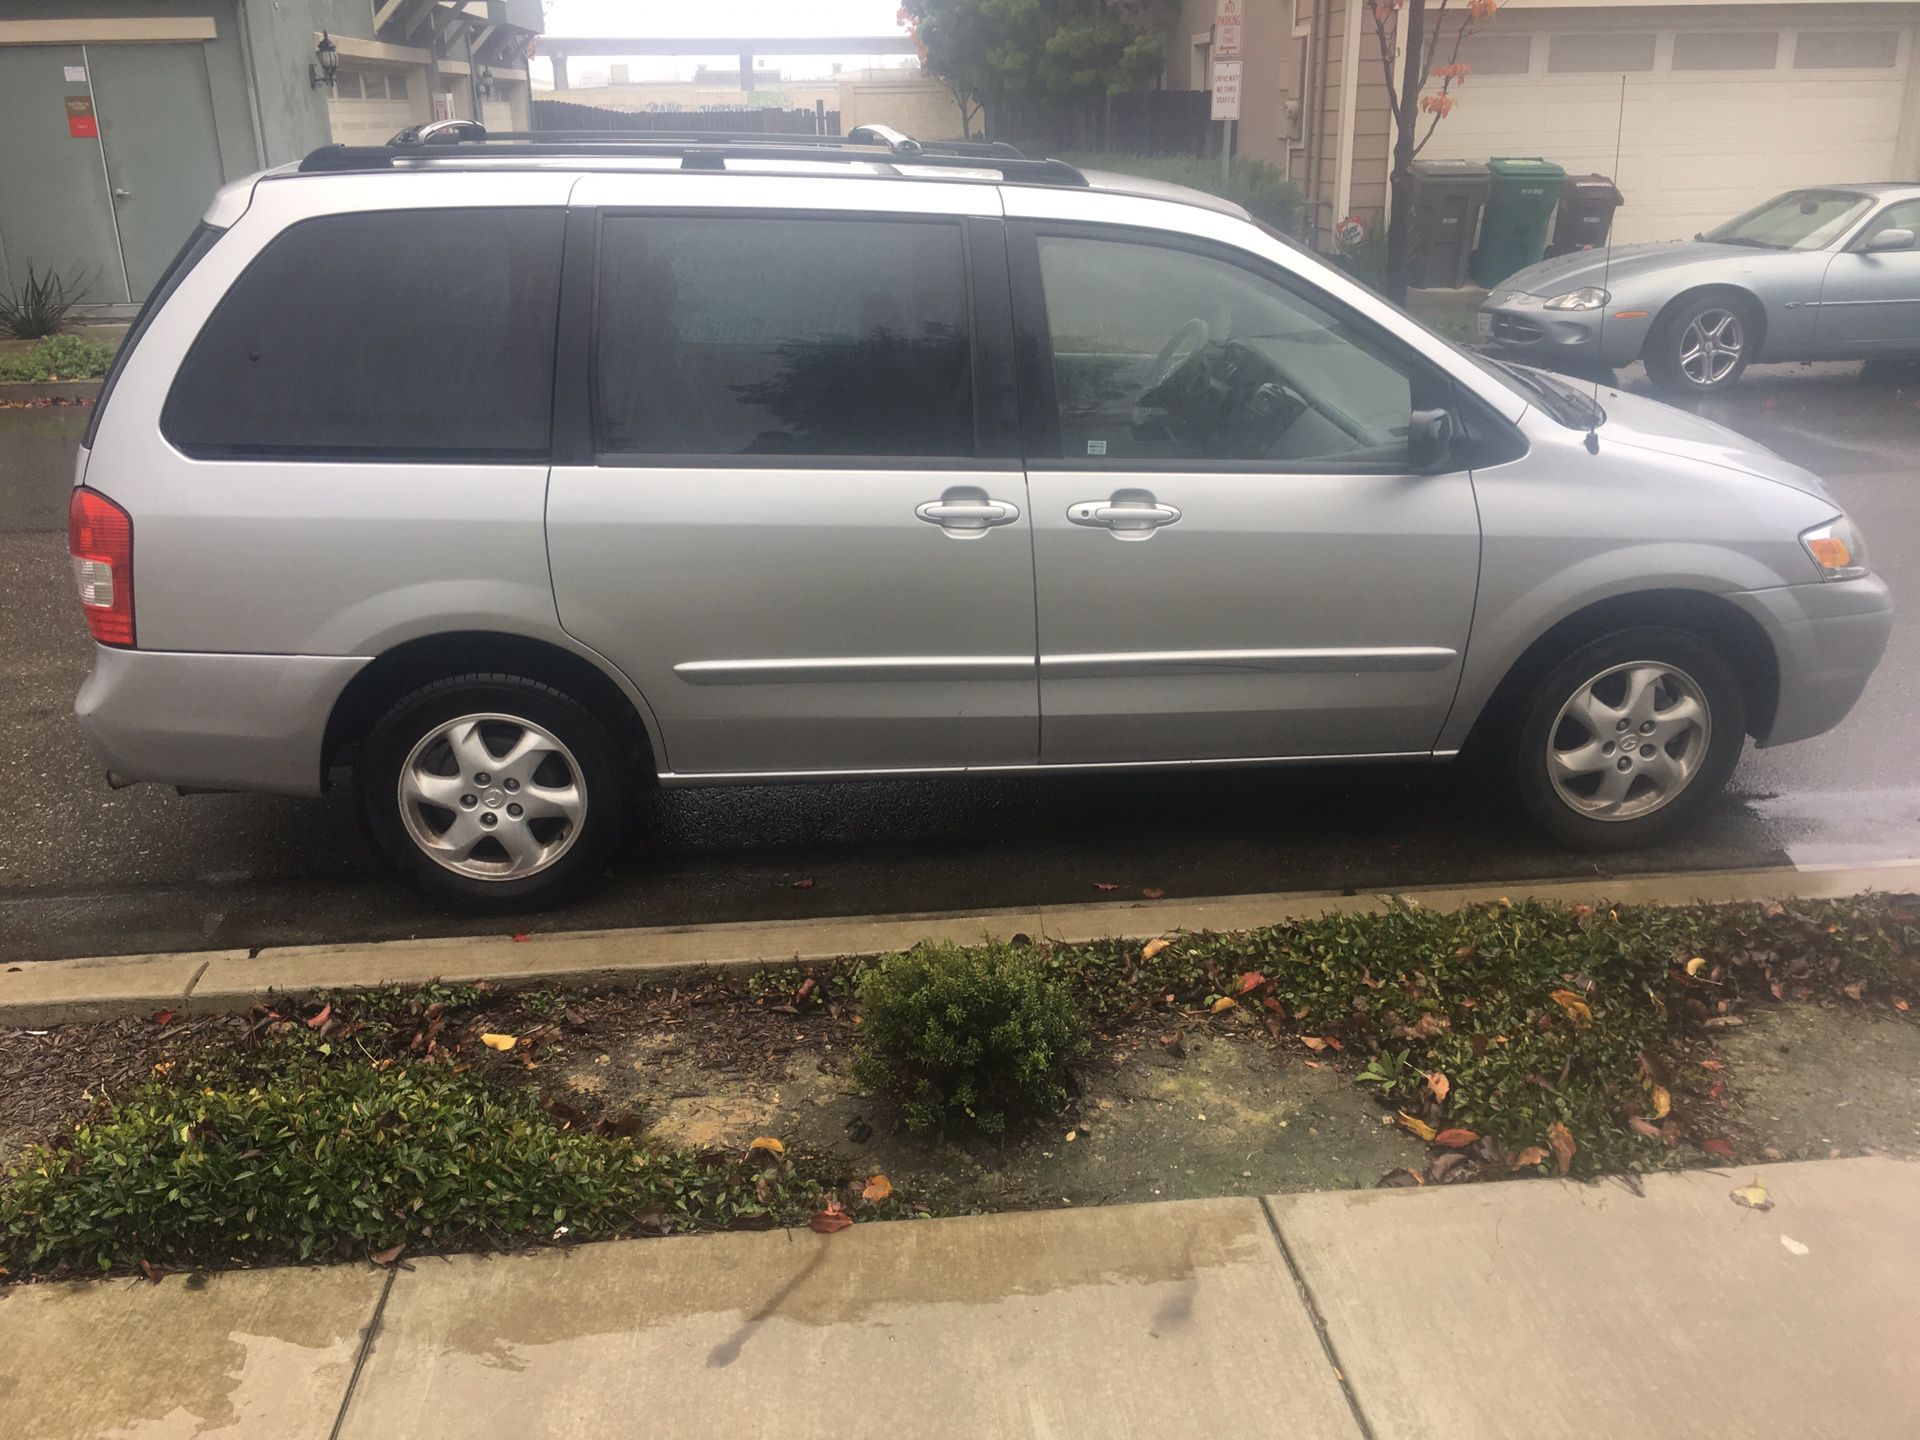 2000 mazda mpv I have clean title in hand and is currently still register until February there are no mechanical problems at all and everything works